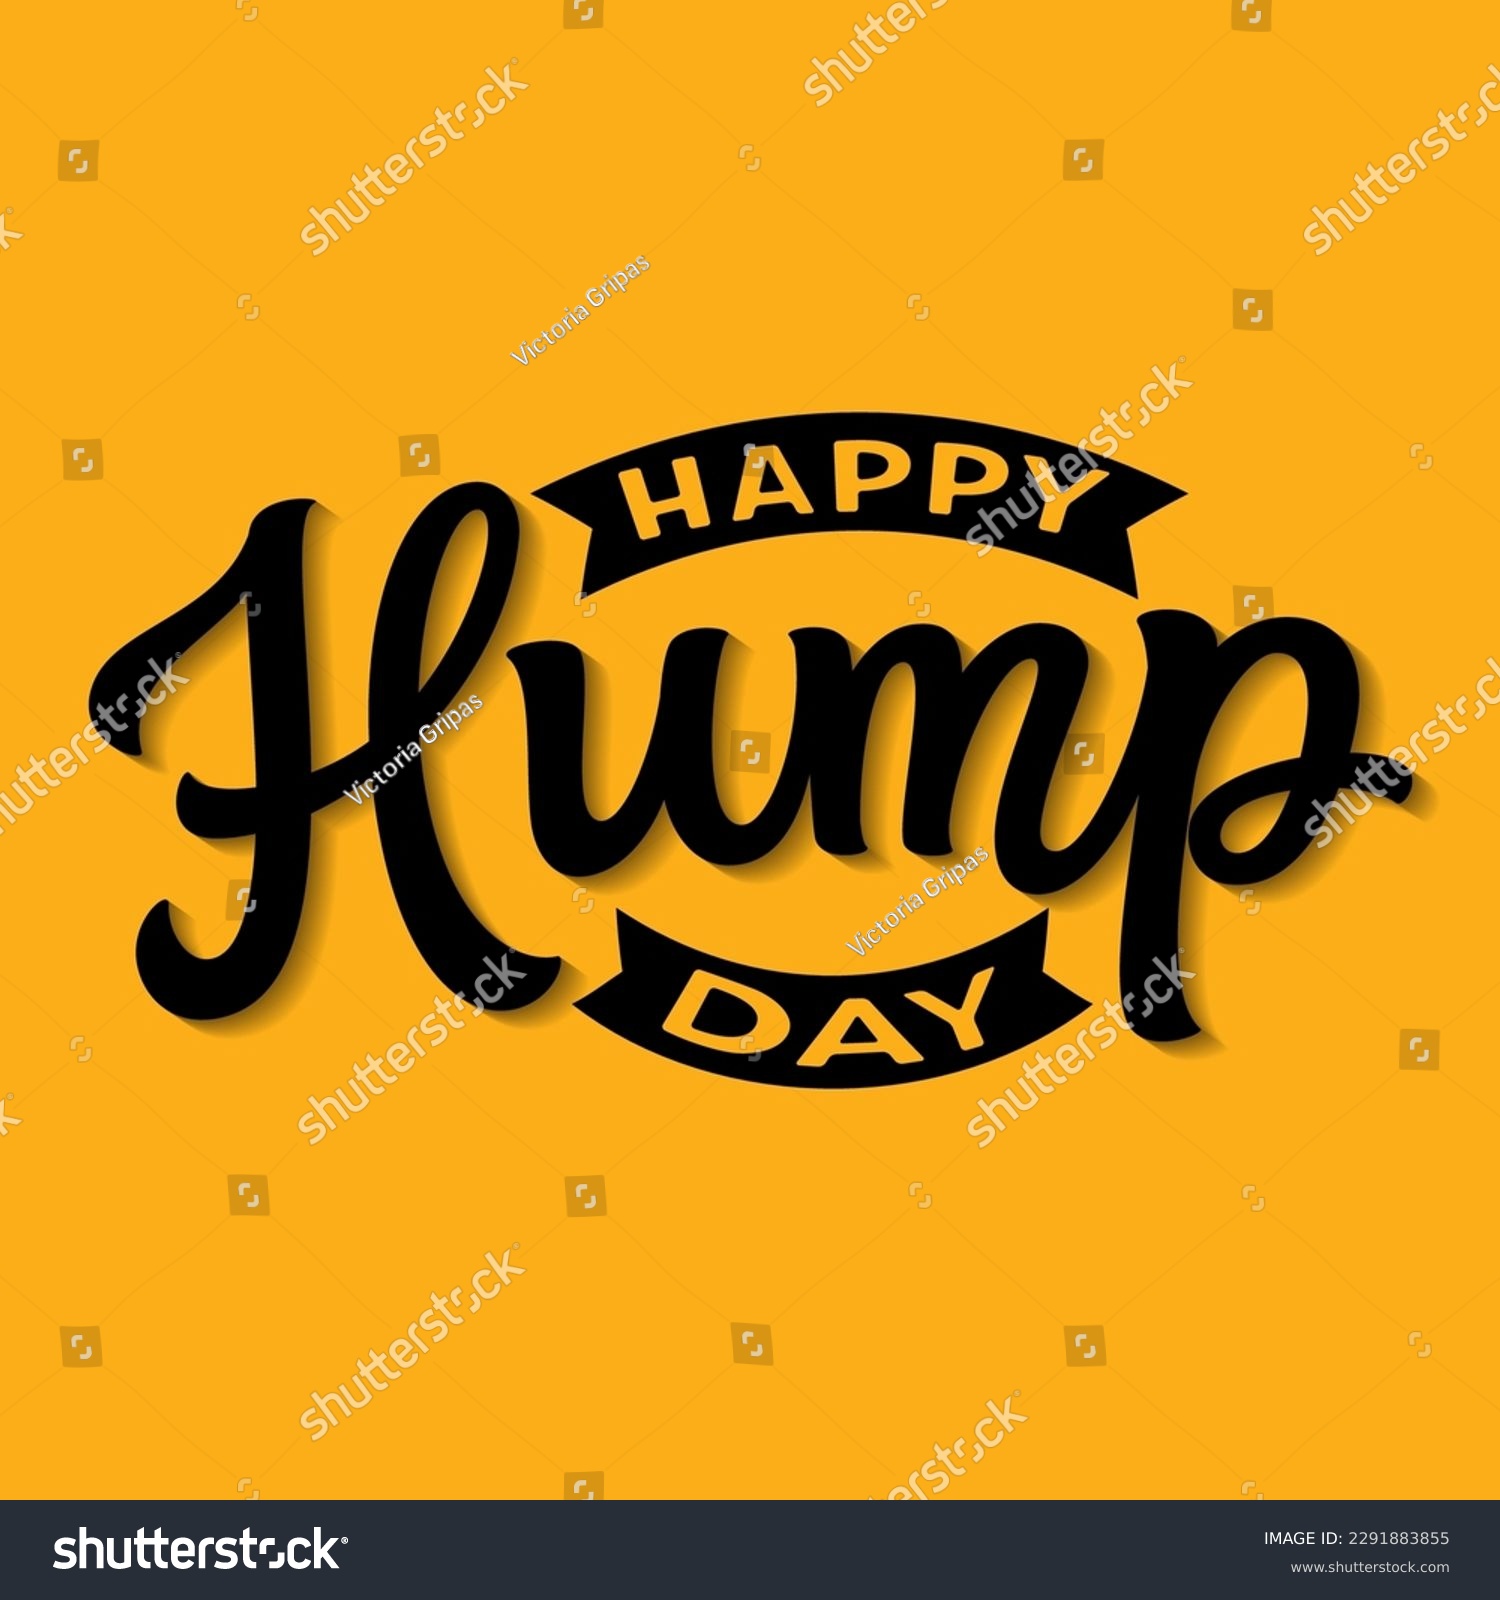 dillon key recommends hump day image pic